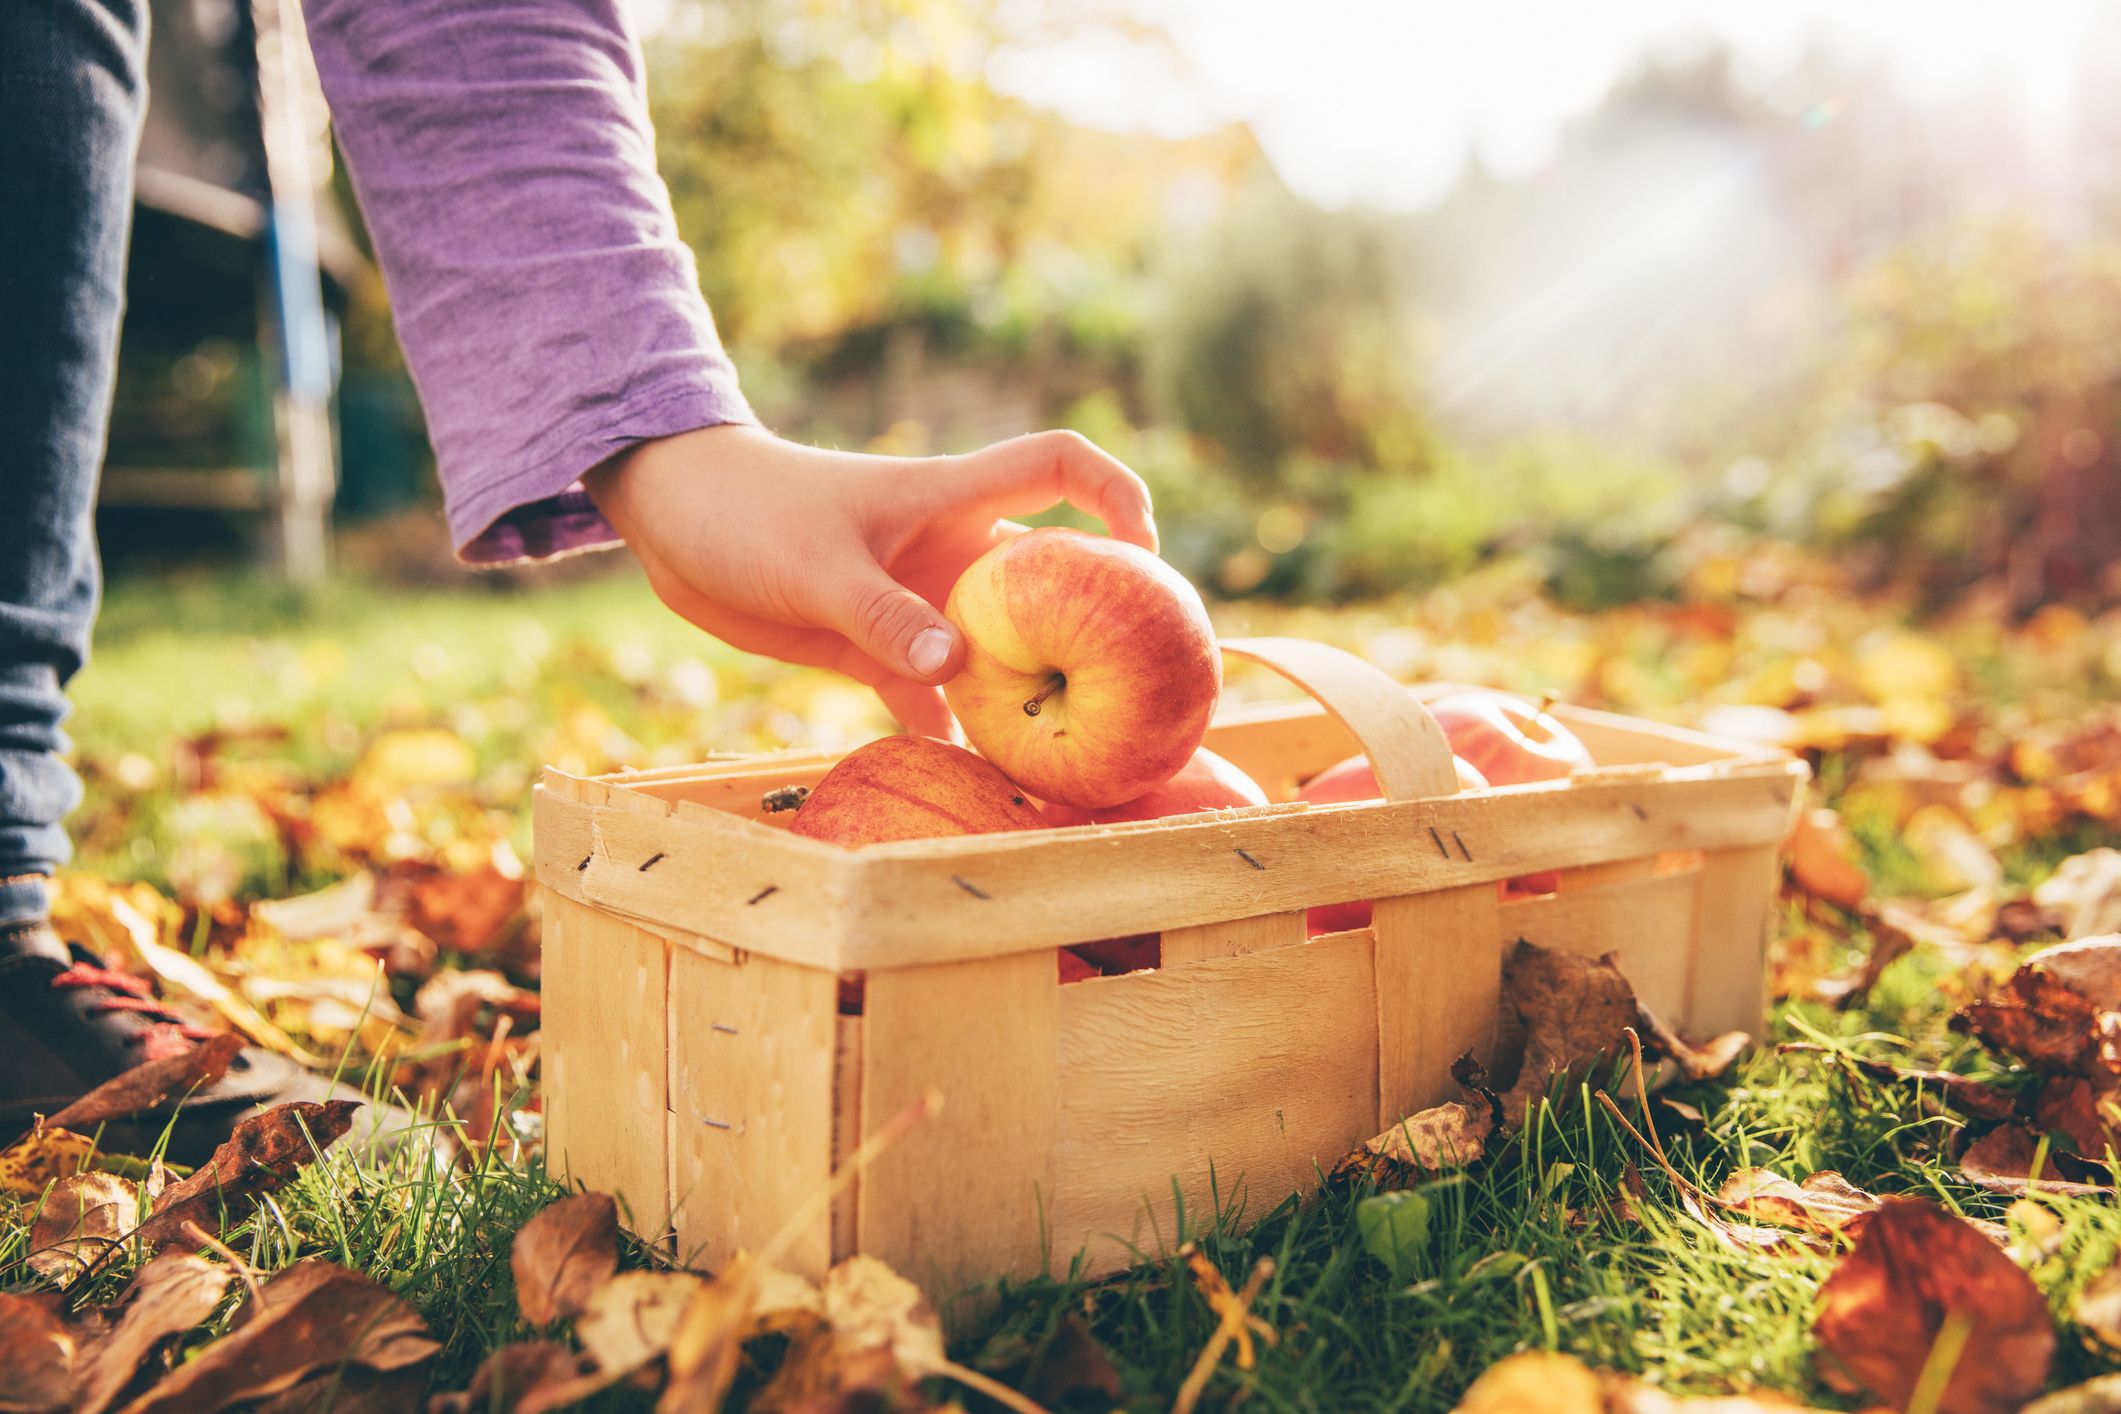 𝗡𝗘𝗪 𝗕𝗟𝗢𝗚 𝗣𝗢𝗦𝗧: “7 Best Outdoor Things To Do During Fall